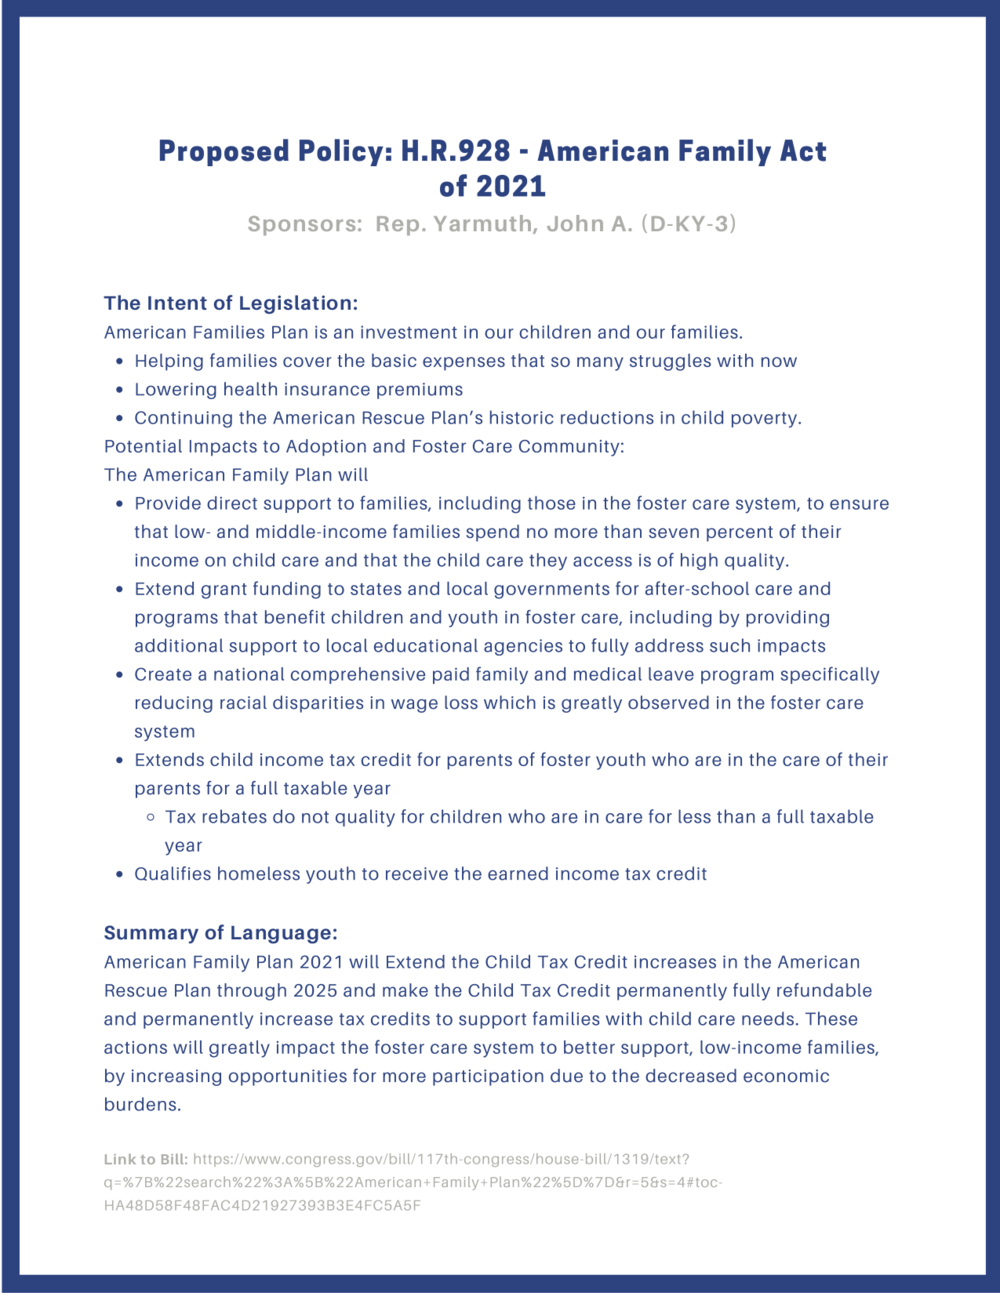 H.R.928 American Family Act of 2021 — Voice for Adoption